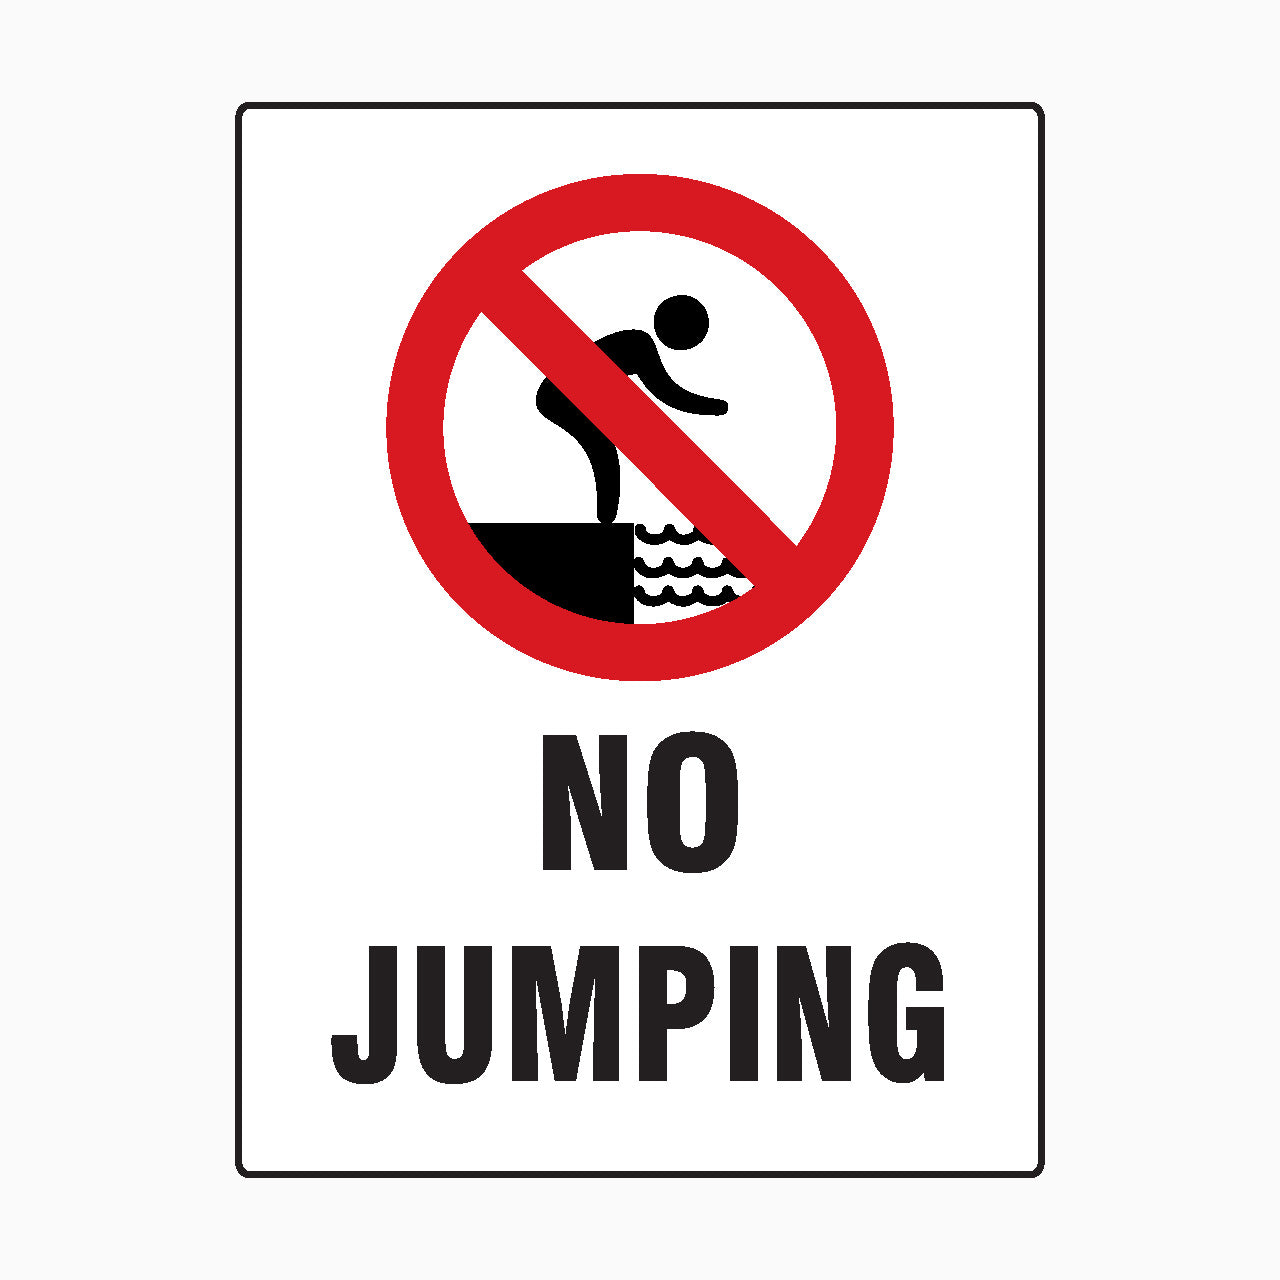 NO JUMPING SIGN - prohibition sign - water safety signs